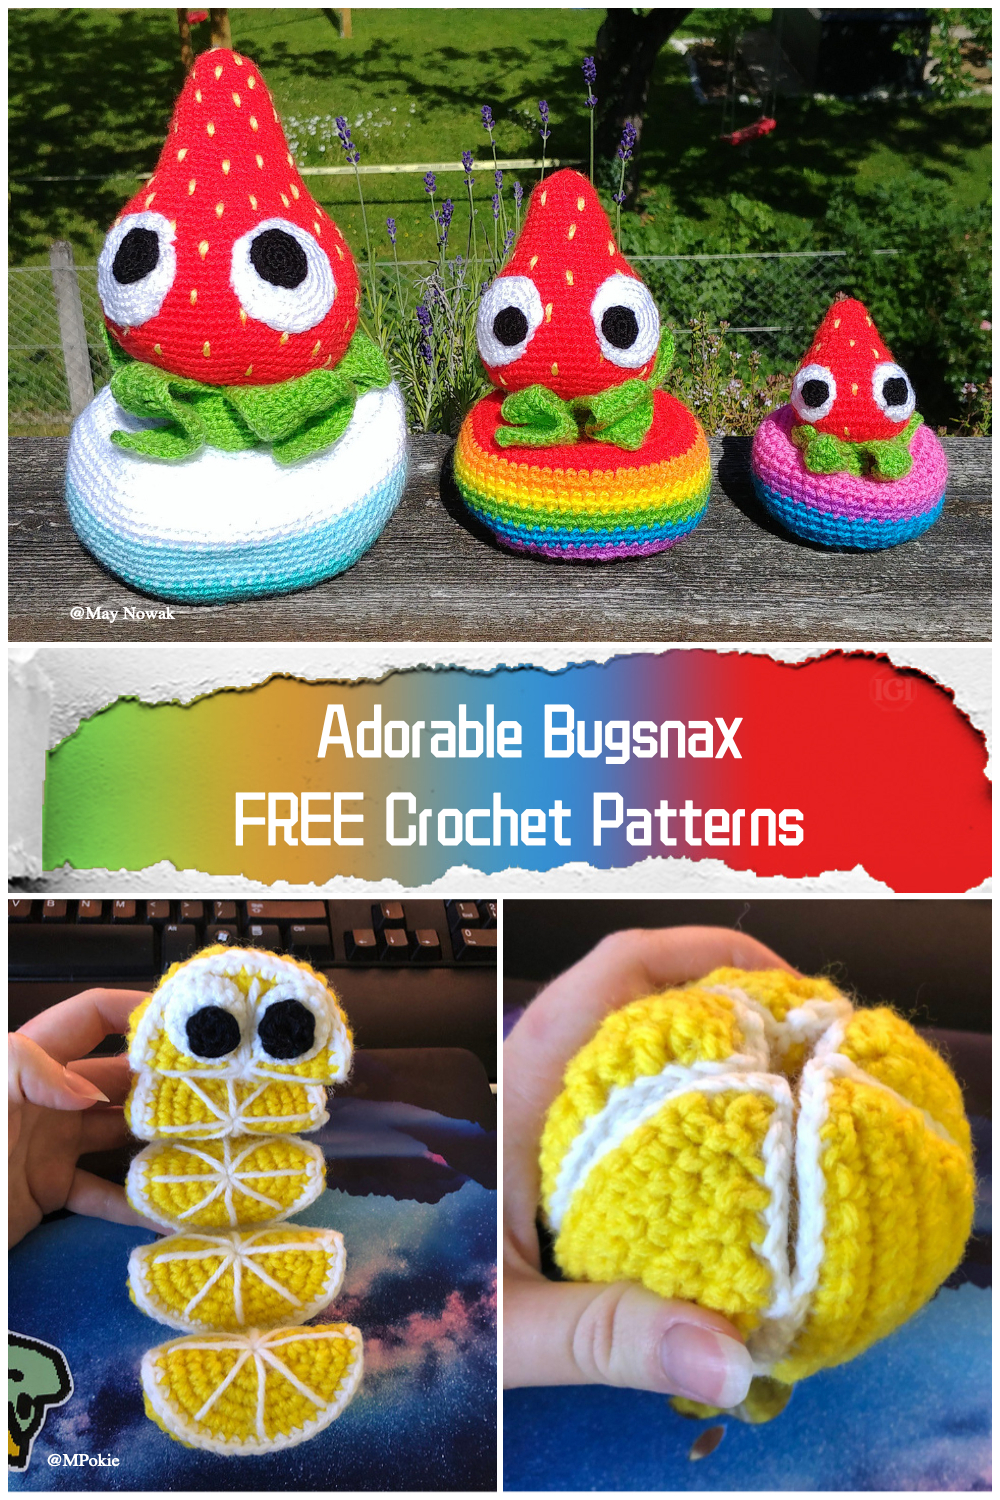 Adorable Bugsnax FREE Crochet Patterns